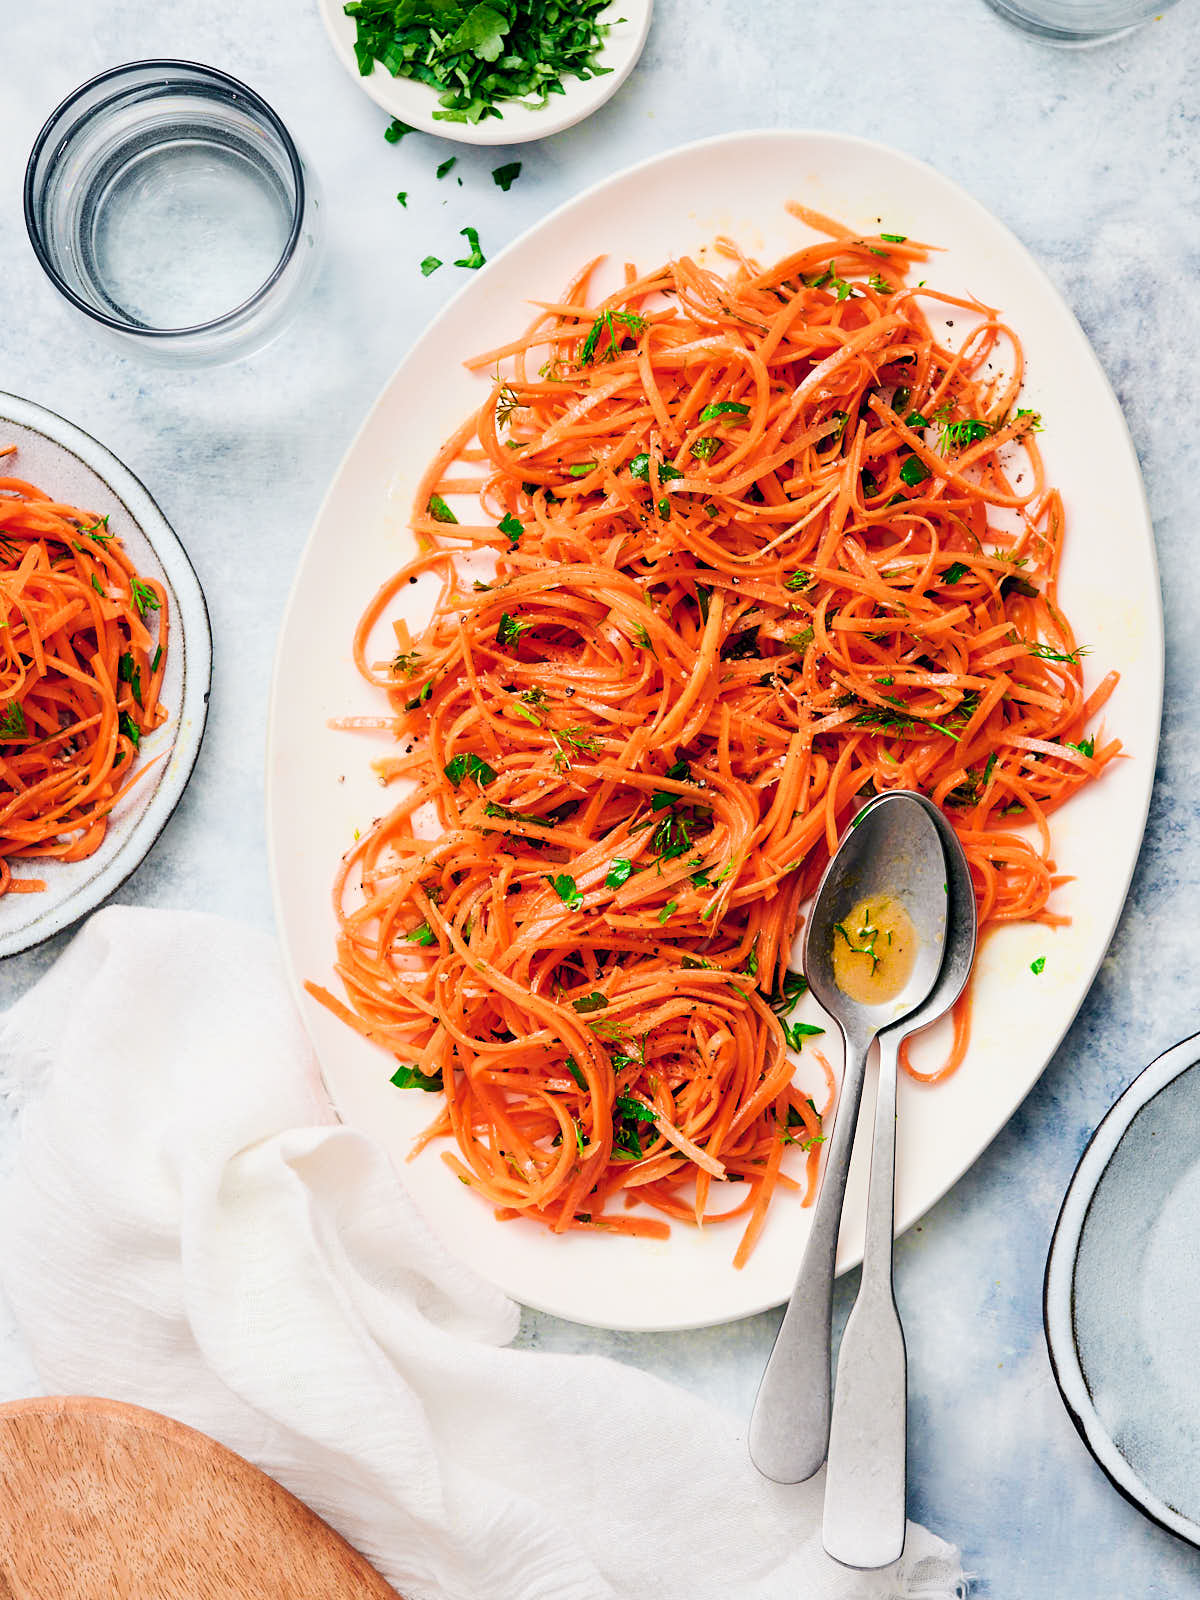 Raw carrot salad on an oval serving plate with serving spoons.